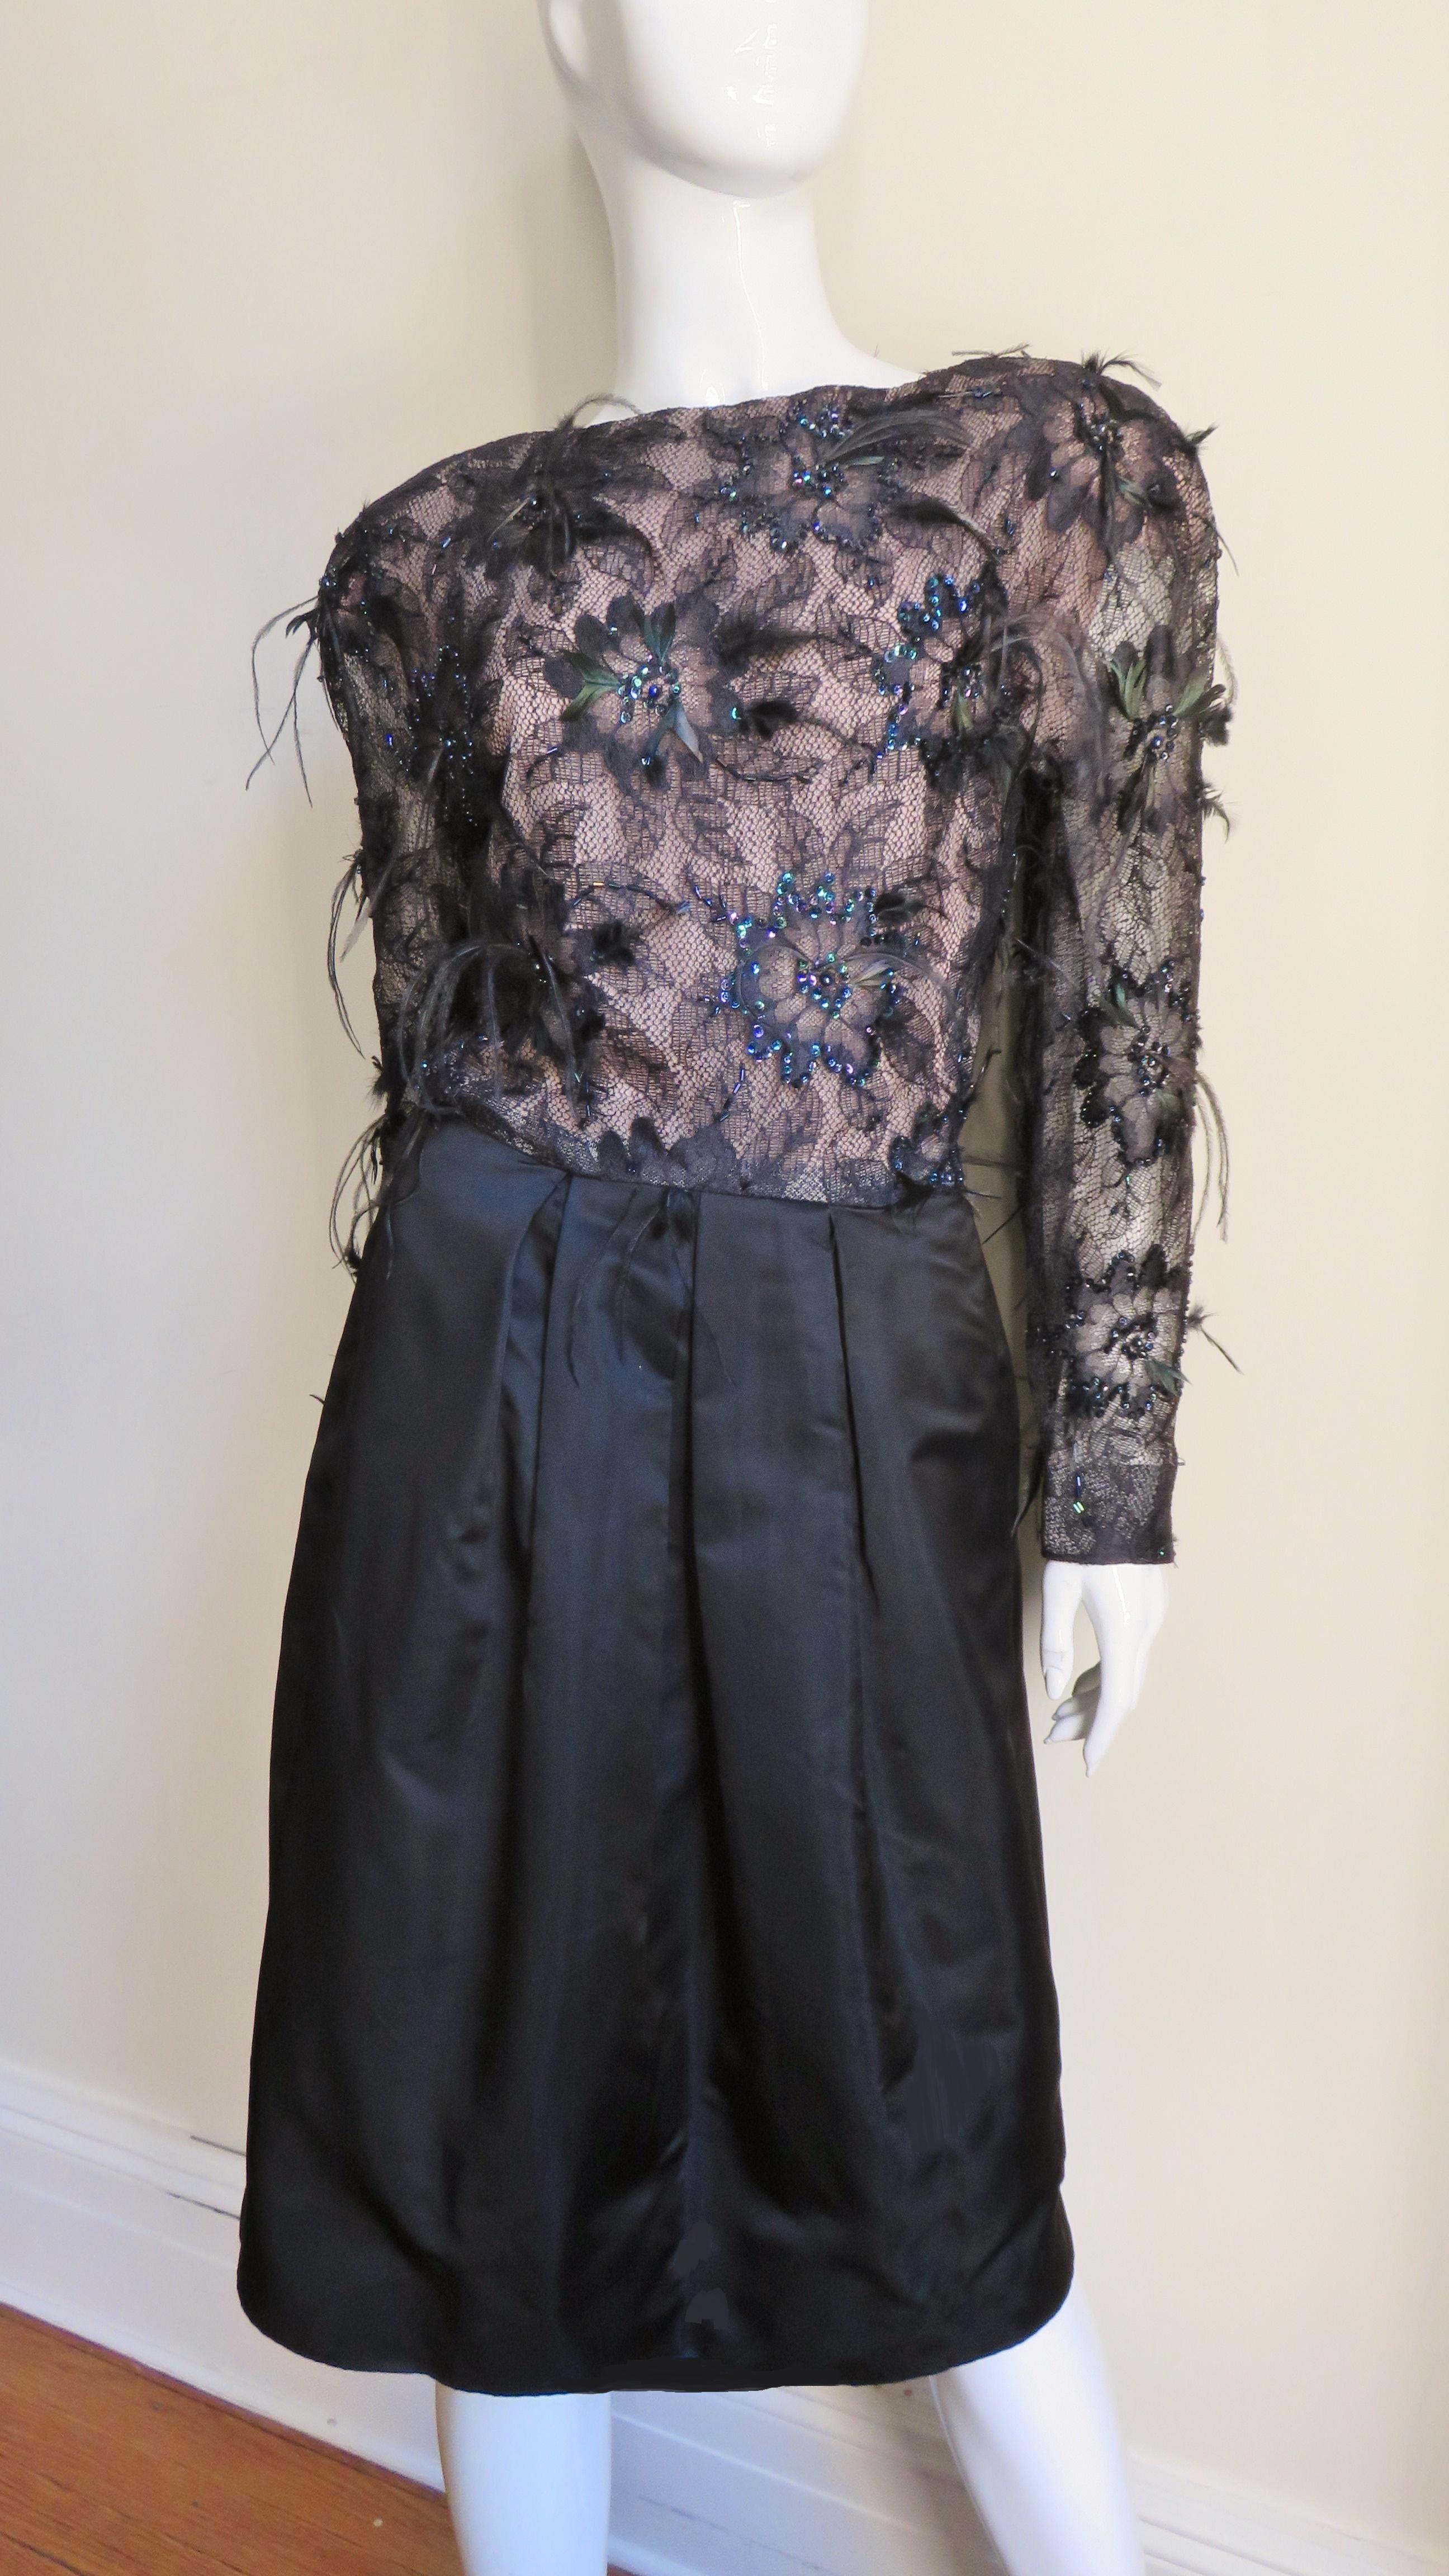 A gorgeous black silk and lace dress by Arnold Scassi.  It has a nude lined black flower lace bodice which is highlighted with black glass carnival beads and sequins plus a smattering of ostrich feathers of varying lengths.  The skirt in contrast,